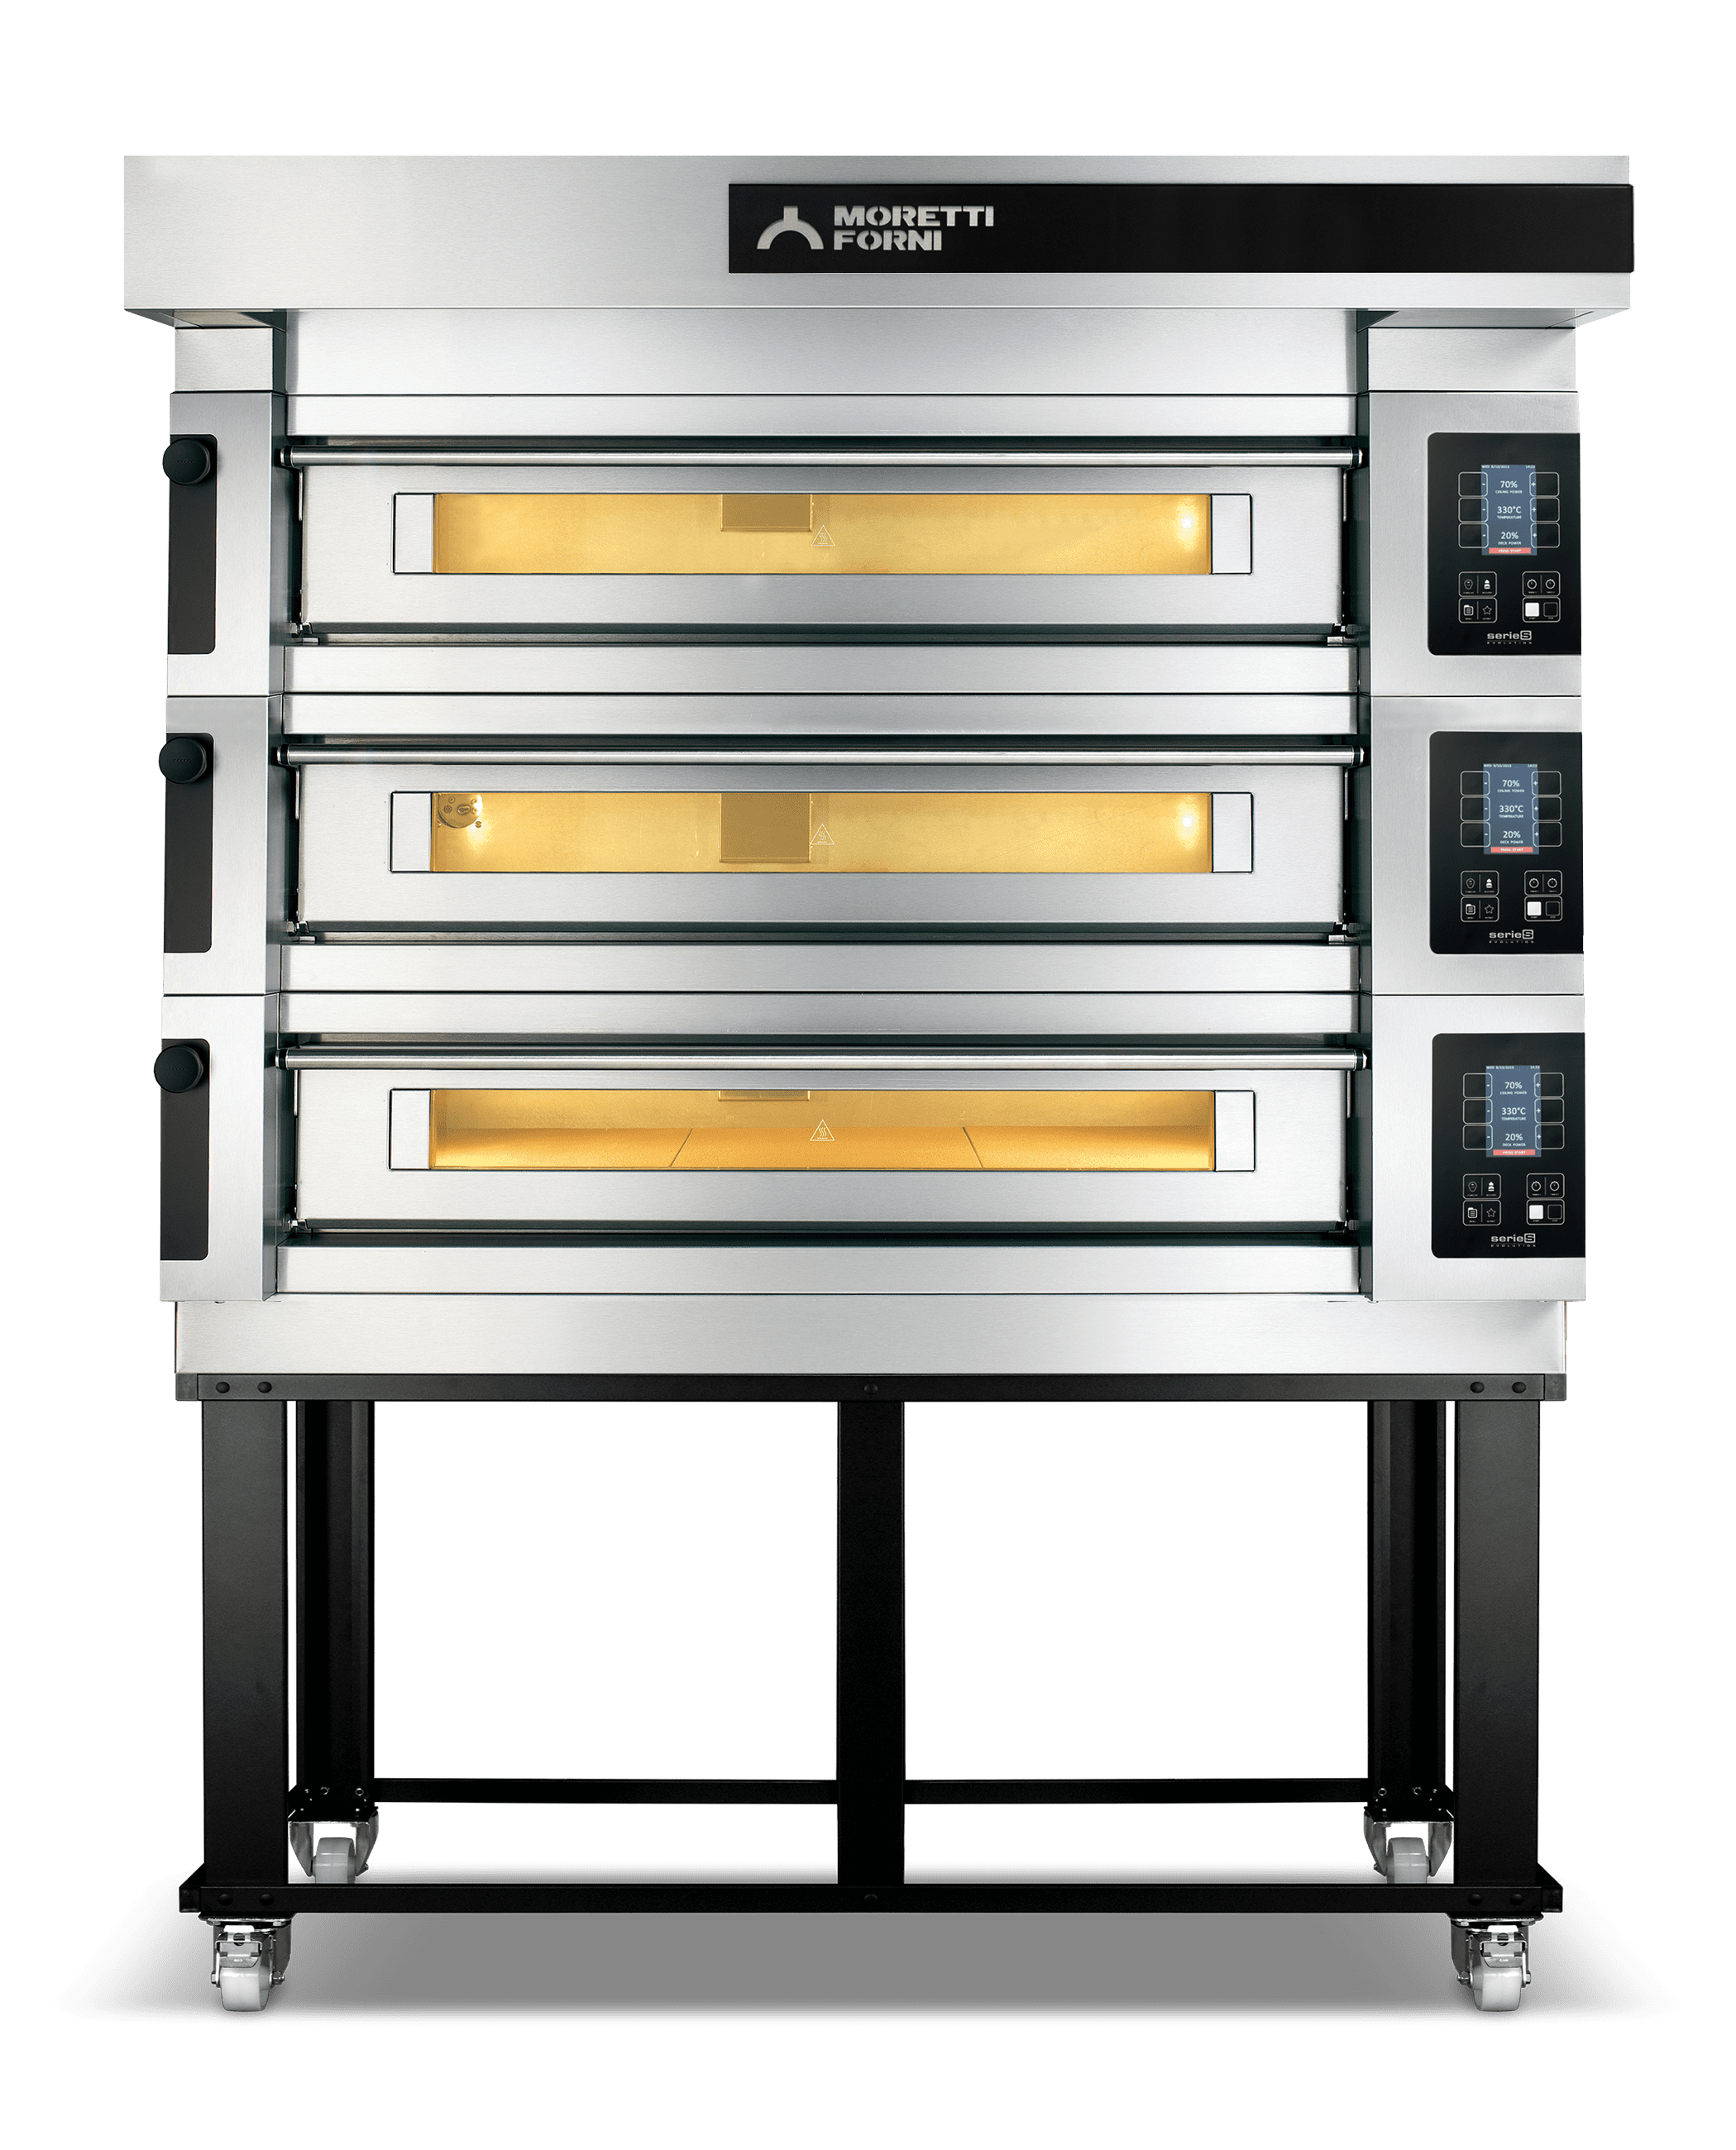 S125E - Serie S modular Electric Pizza oven 48-3/4"x49-1/2"x6-1/4" (Chamber)